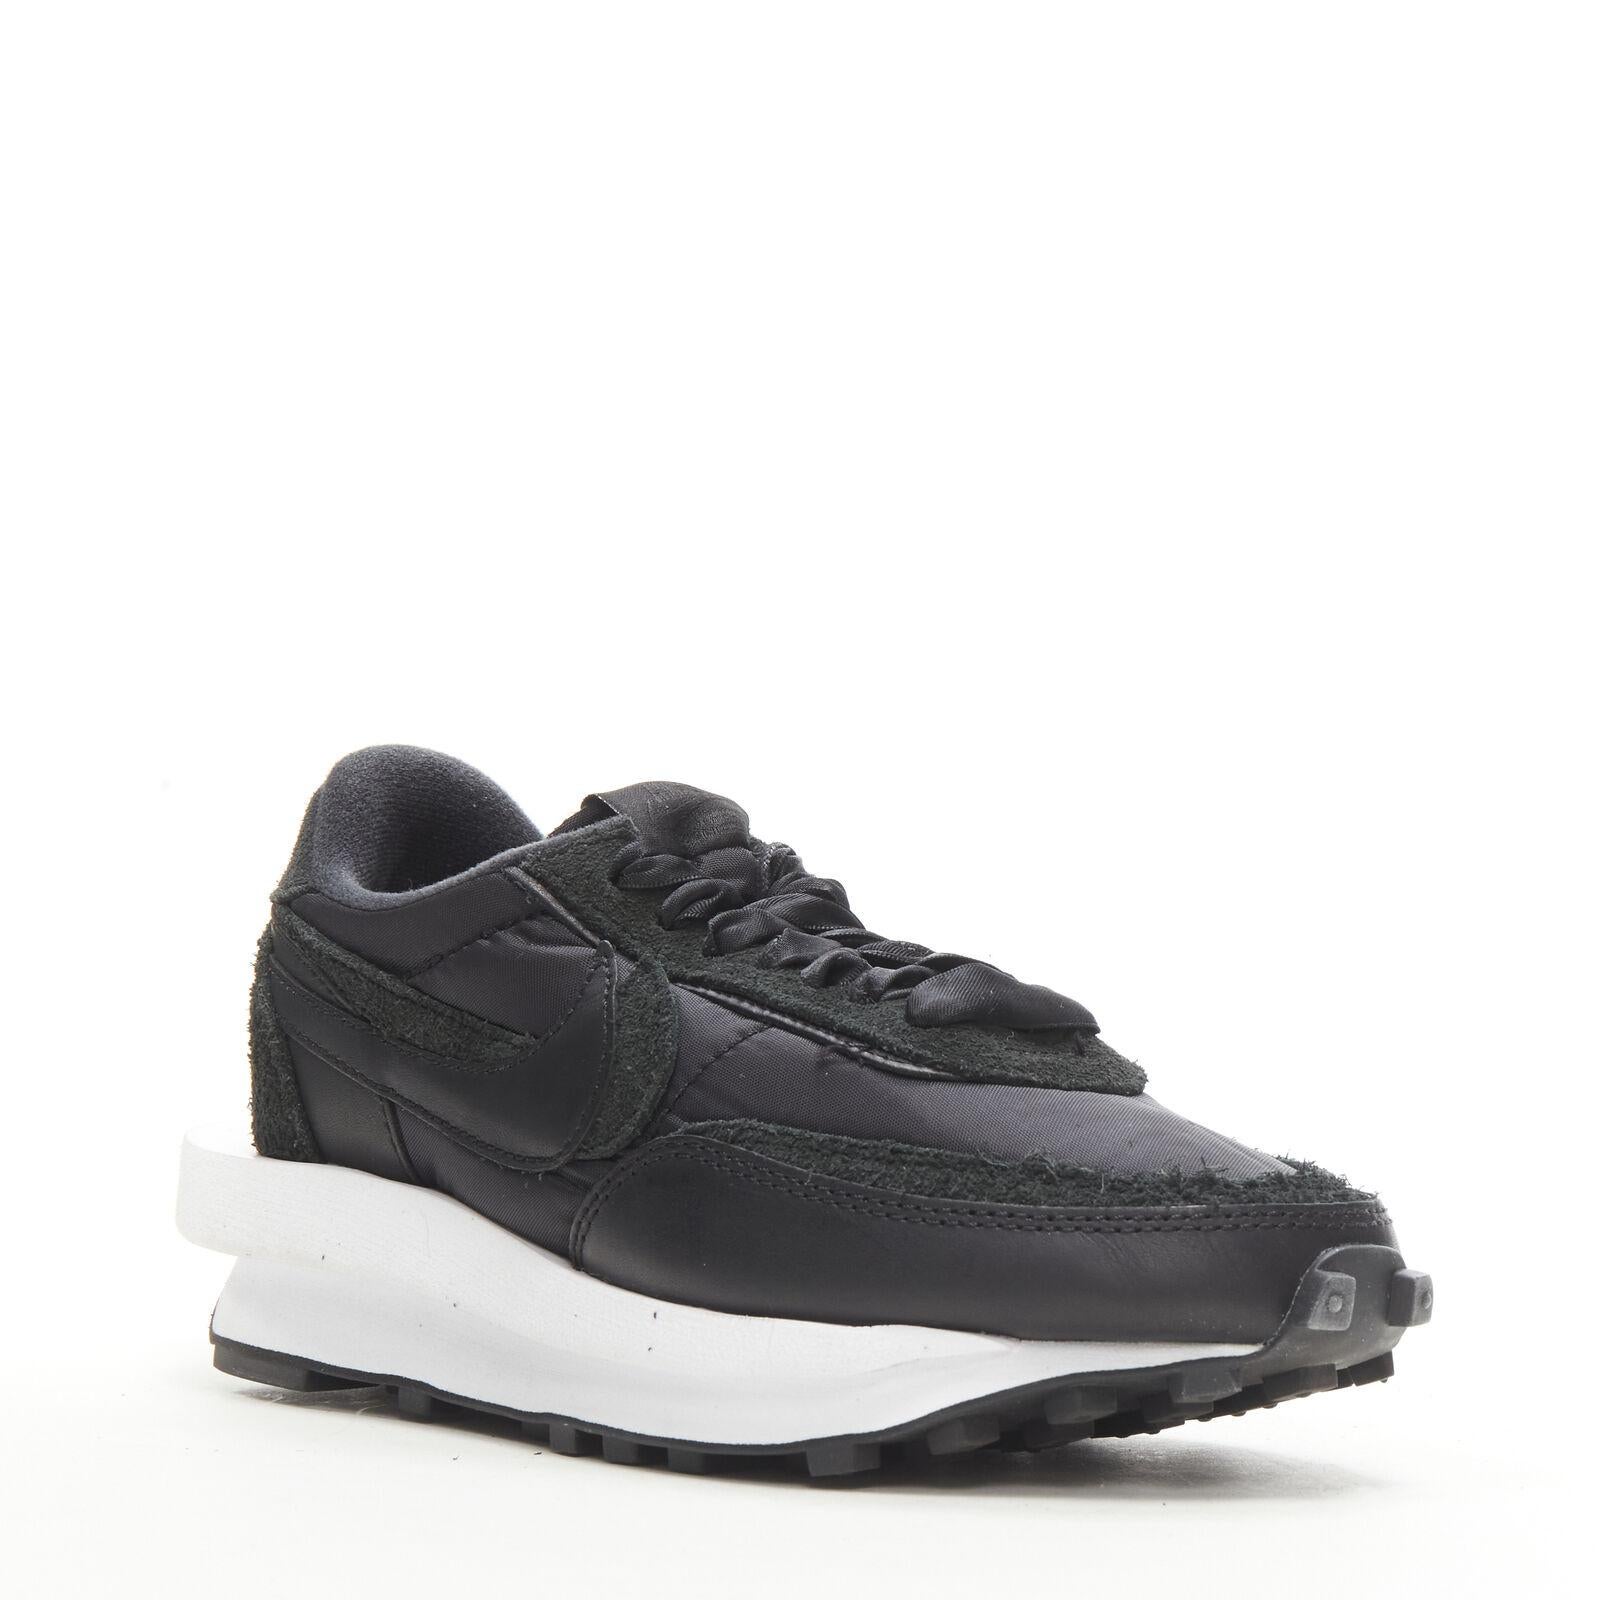 NIKE SACAI LD Waffle BV0073 002 black white sneaker US5 EU37.5
Reference: ANWU/A00351
Brand: Nike
Designer: Chitose Abe
Model: BV0073 002
Collection: Sacai LD Waffle
Material: Fabric, Leather
Color: Black, White
Pattern: Solid
Closure: Lace